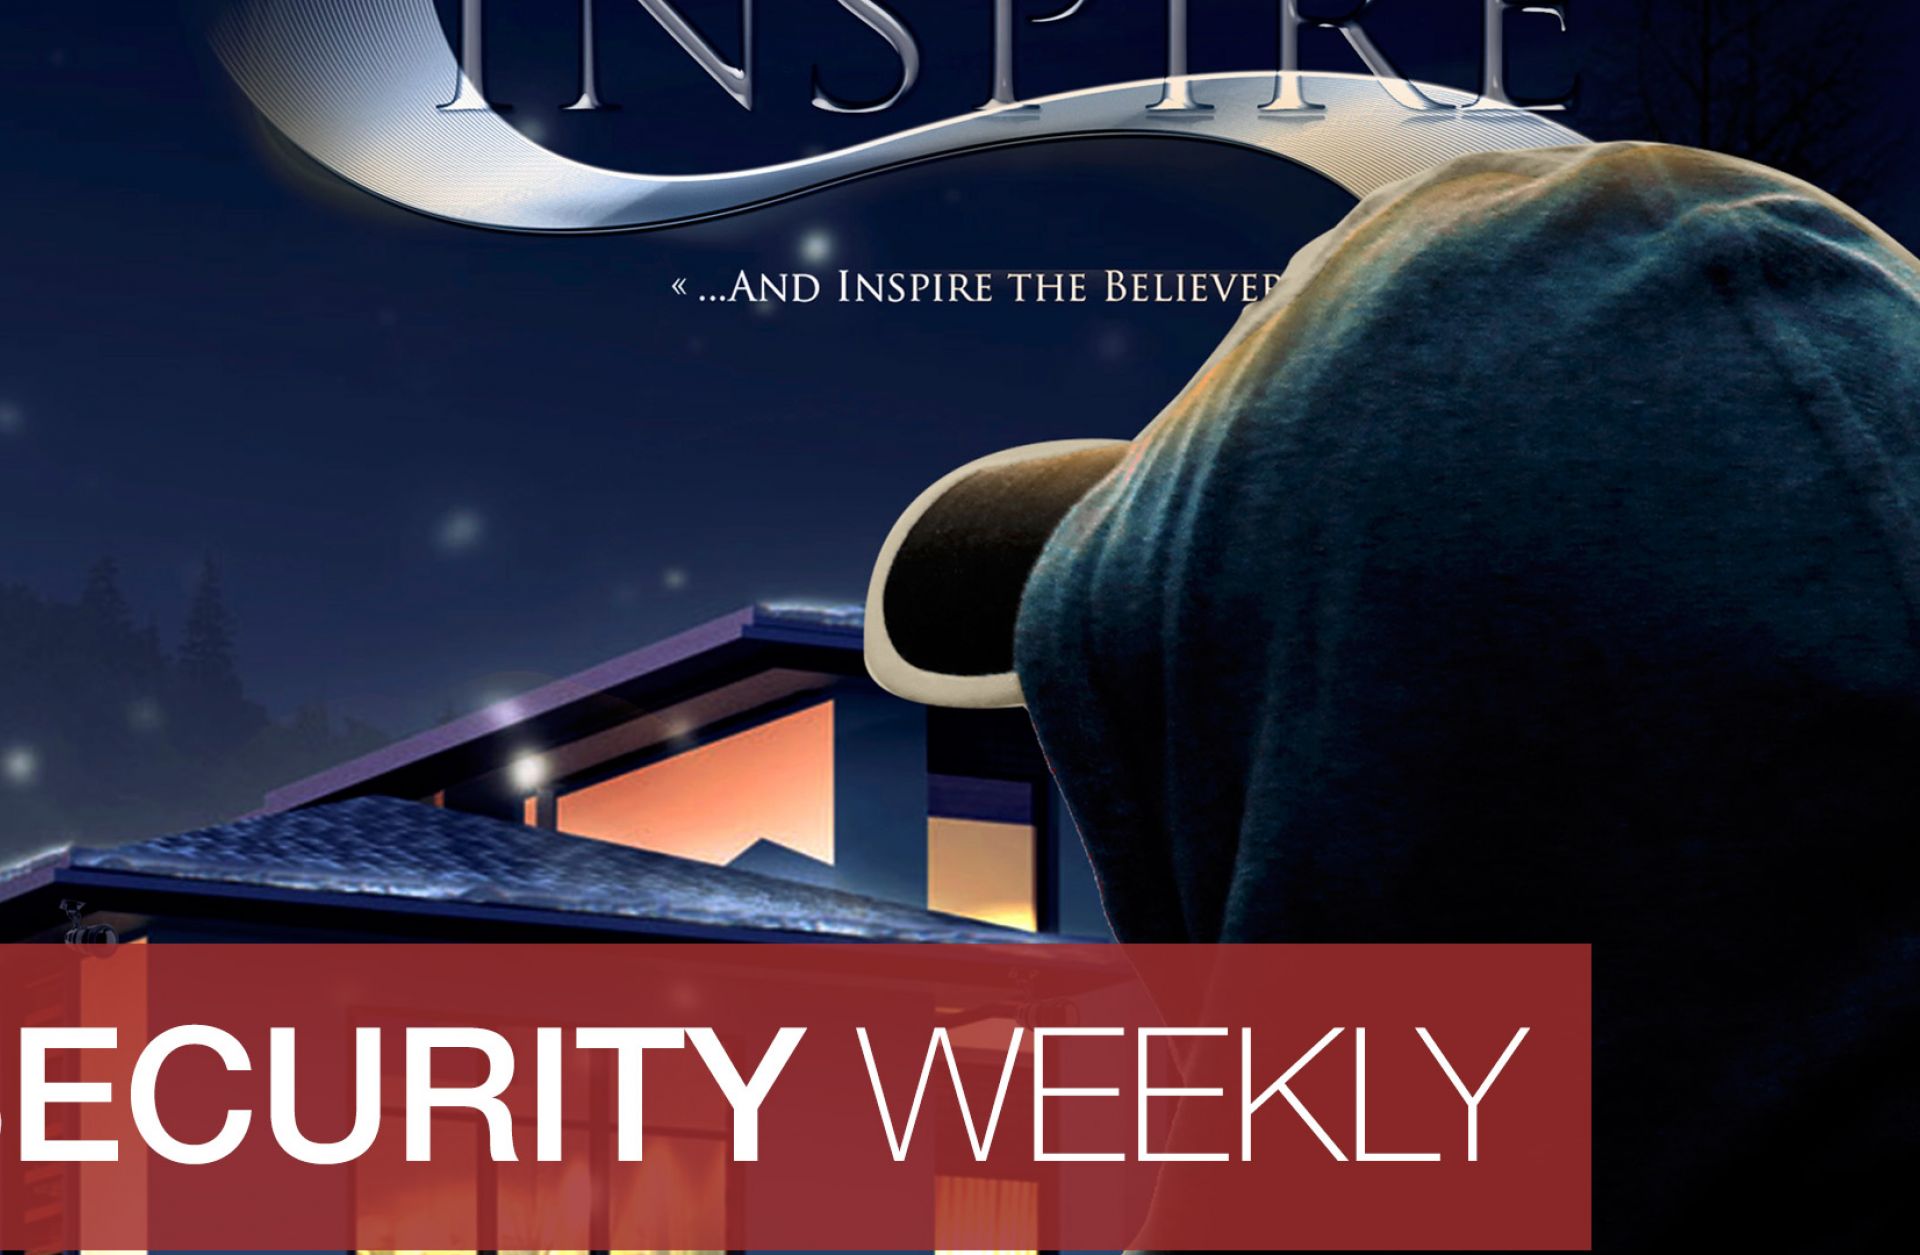 In the recently published 15th issue of Inspire magazine, al Qaeda in the Arabian Peninsula exhorts its followers to carry out attacks against prominent businesspeople and economic leaders.